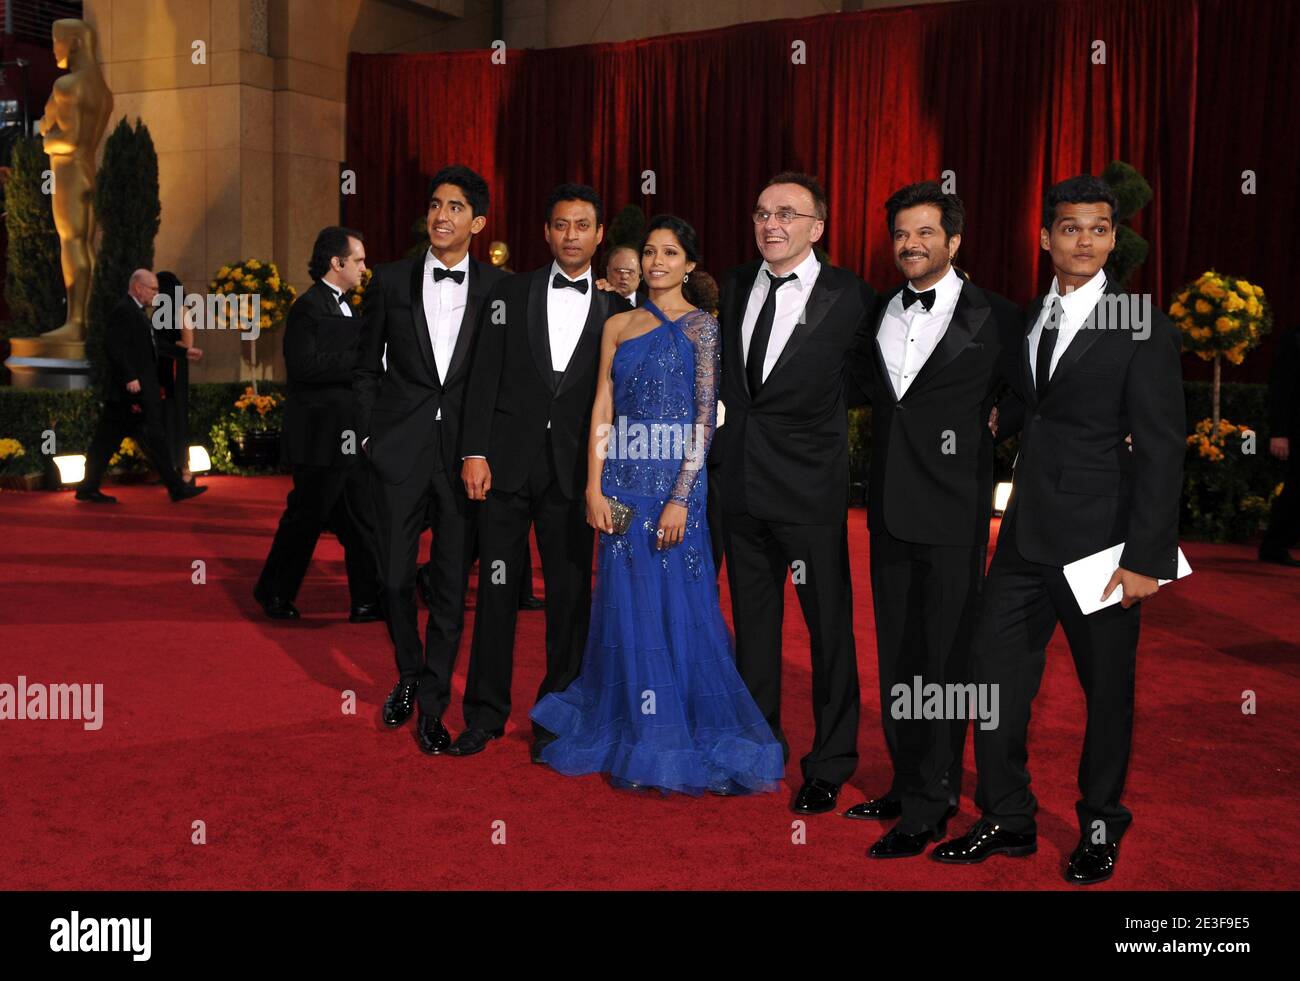 Dev Patel, Irrfan Khan, Freida Pinto, Danny Boyle, Anil Kapoor and Madhur Mittal arriving at the 81st Academy Awards ceremony, held at the Kodak Theater in Los Angeles, CA, USA on February 22, 2009. Photo by Lionel Hahn/ABACAPRESS.COM (Pictured : Dev Patel, Irrfan Khan, Freida Pinto, Danny Boyle, Anil Kapoor, Madhur Mittal) Stock Photo